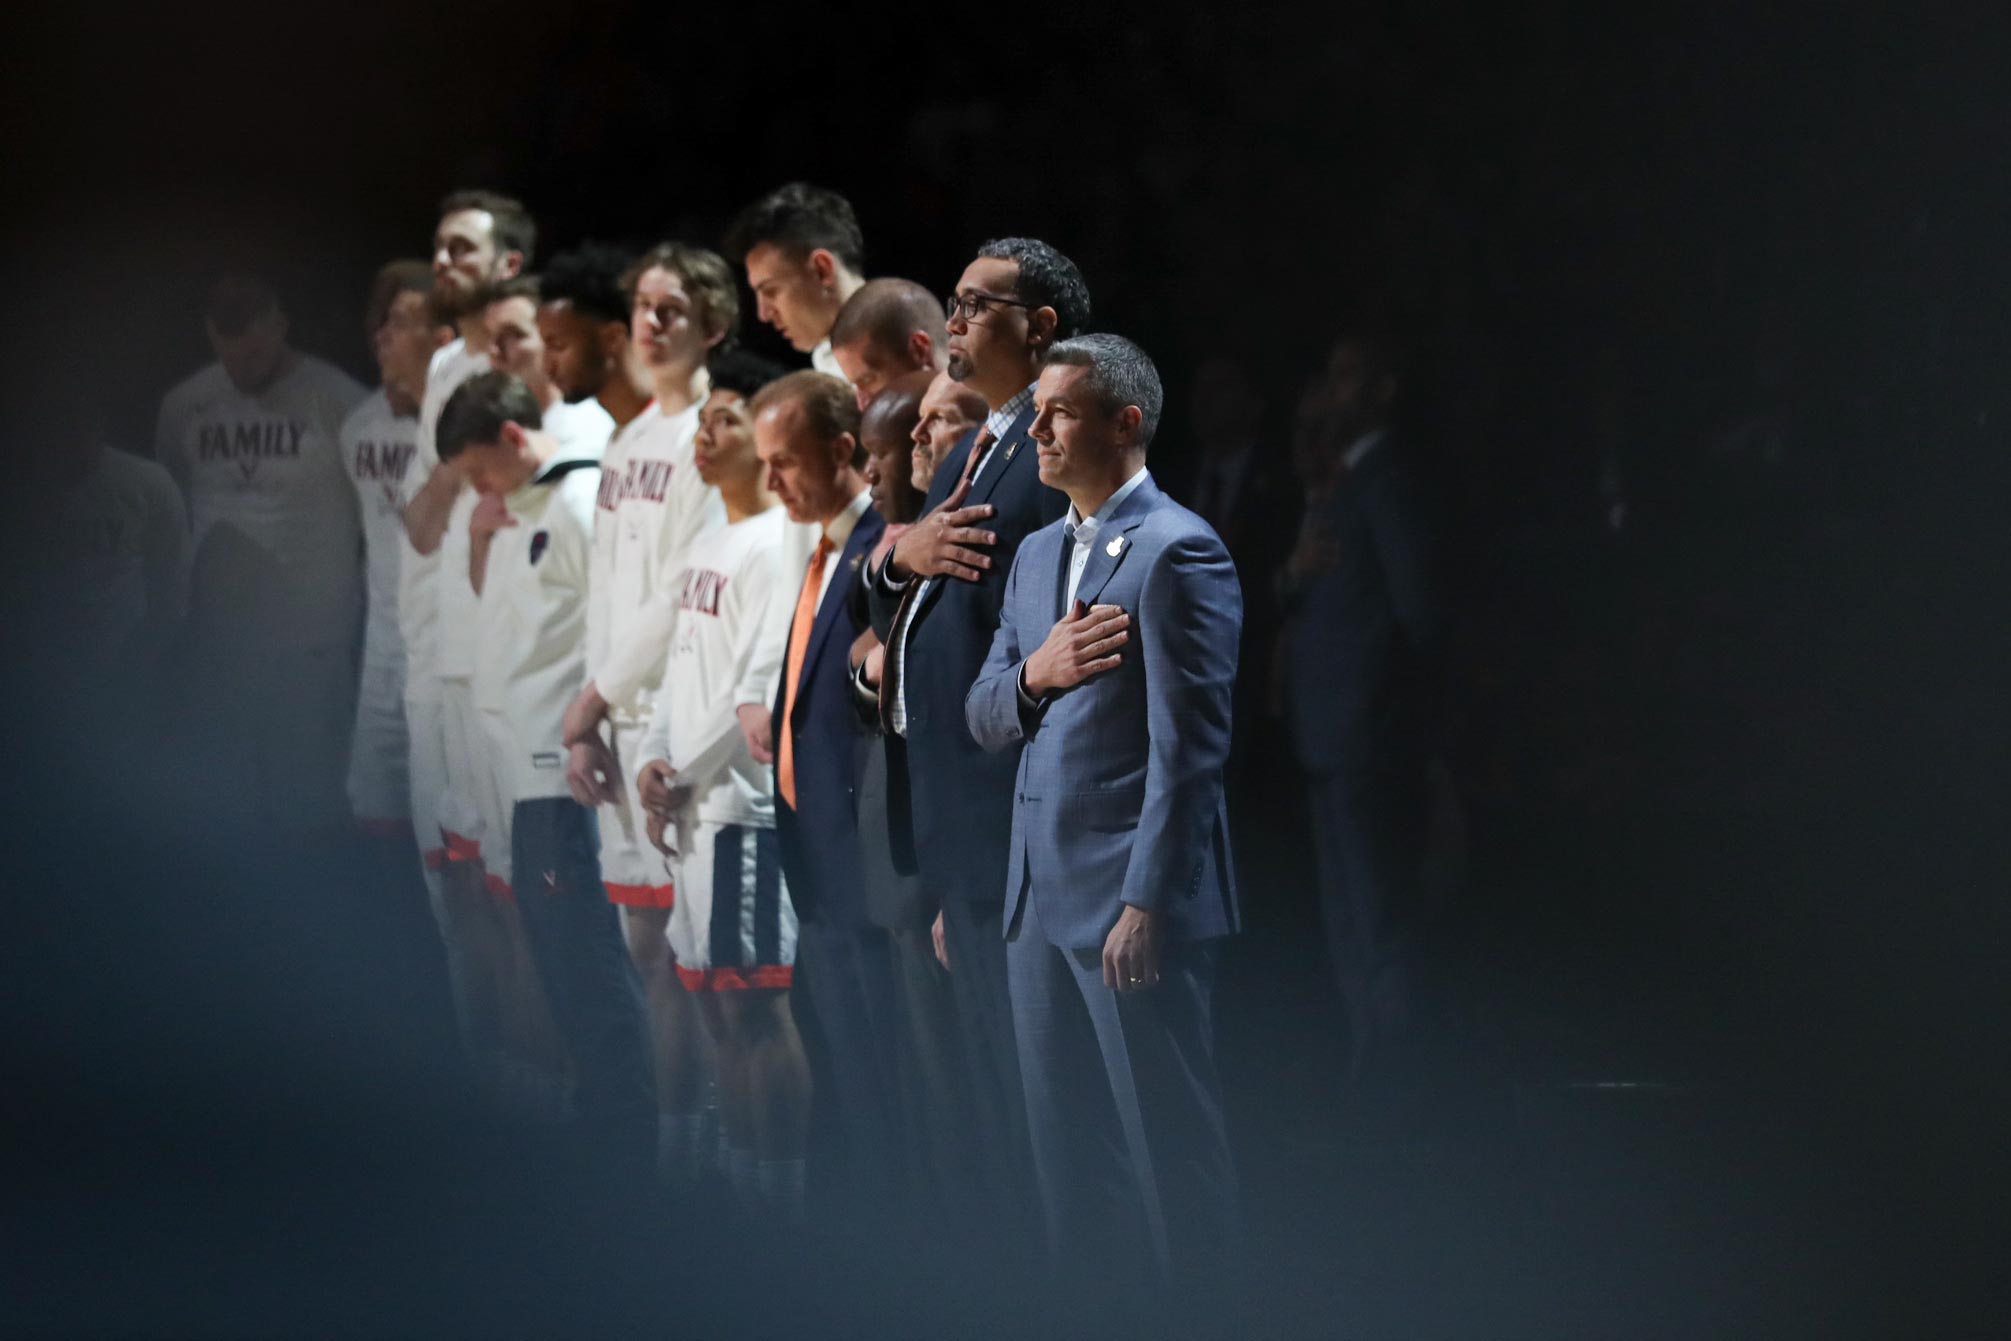 Tony Bennett and basketball team stands respectfully for the National Anthem